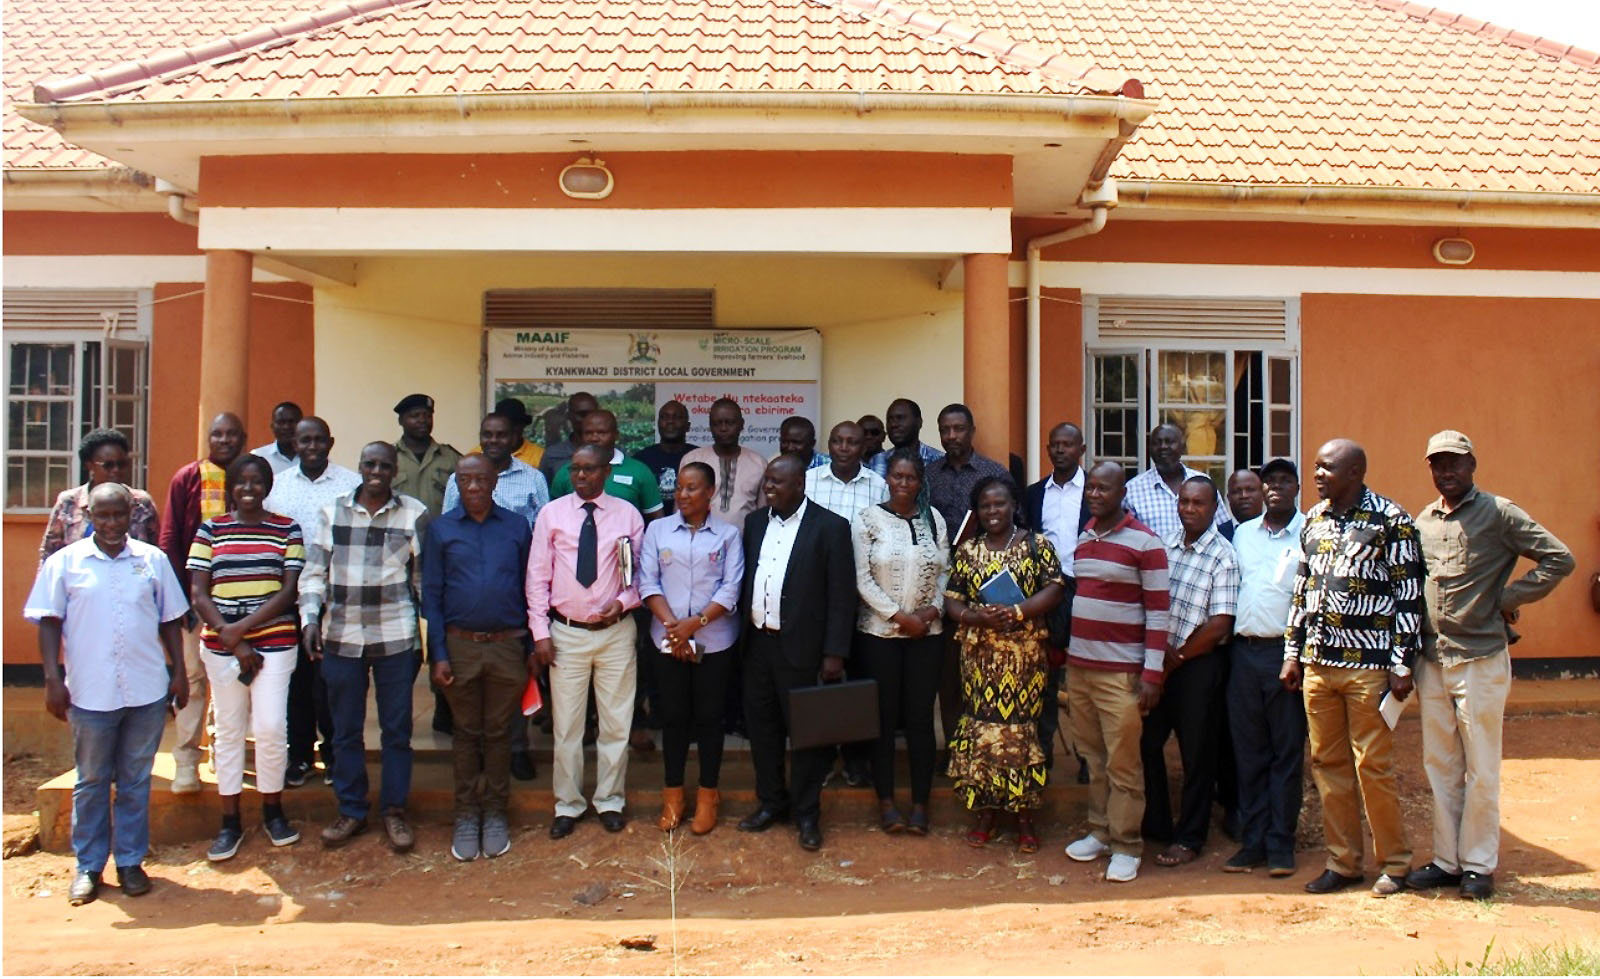 The Makerere delegation led by DVCFA Prof. Henry Alinaitwe (4th L) and the host team pose for a photo after the meeting on 8th February 2023 in Kyankwanzi District.